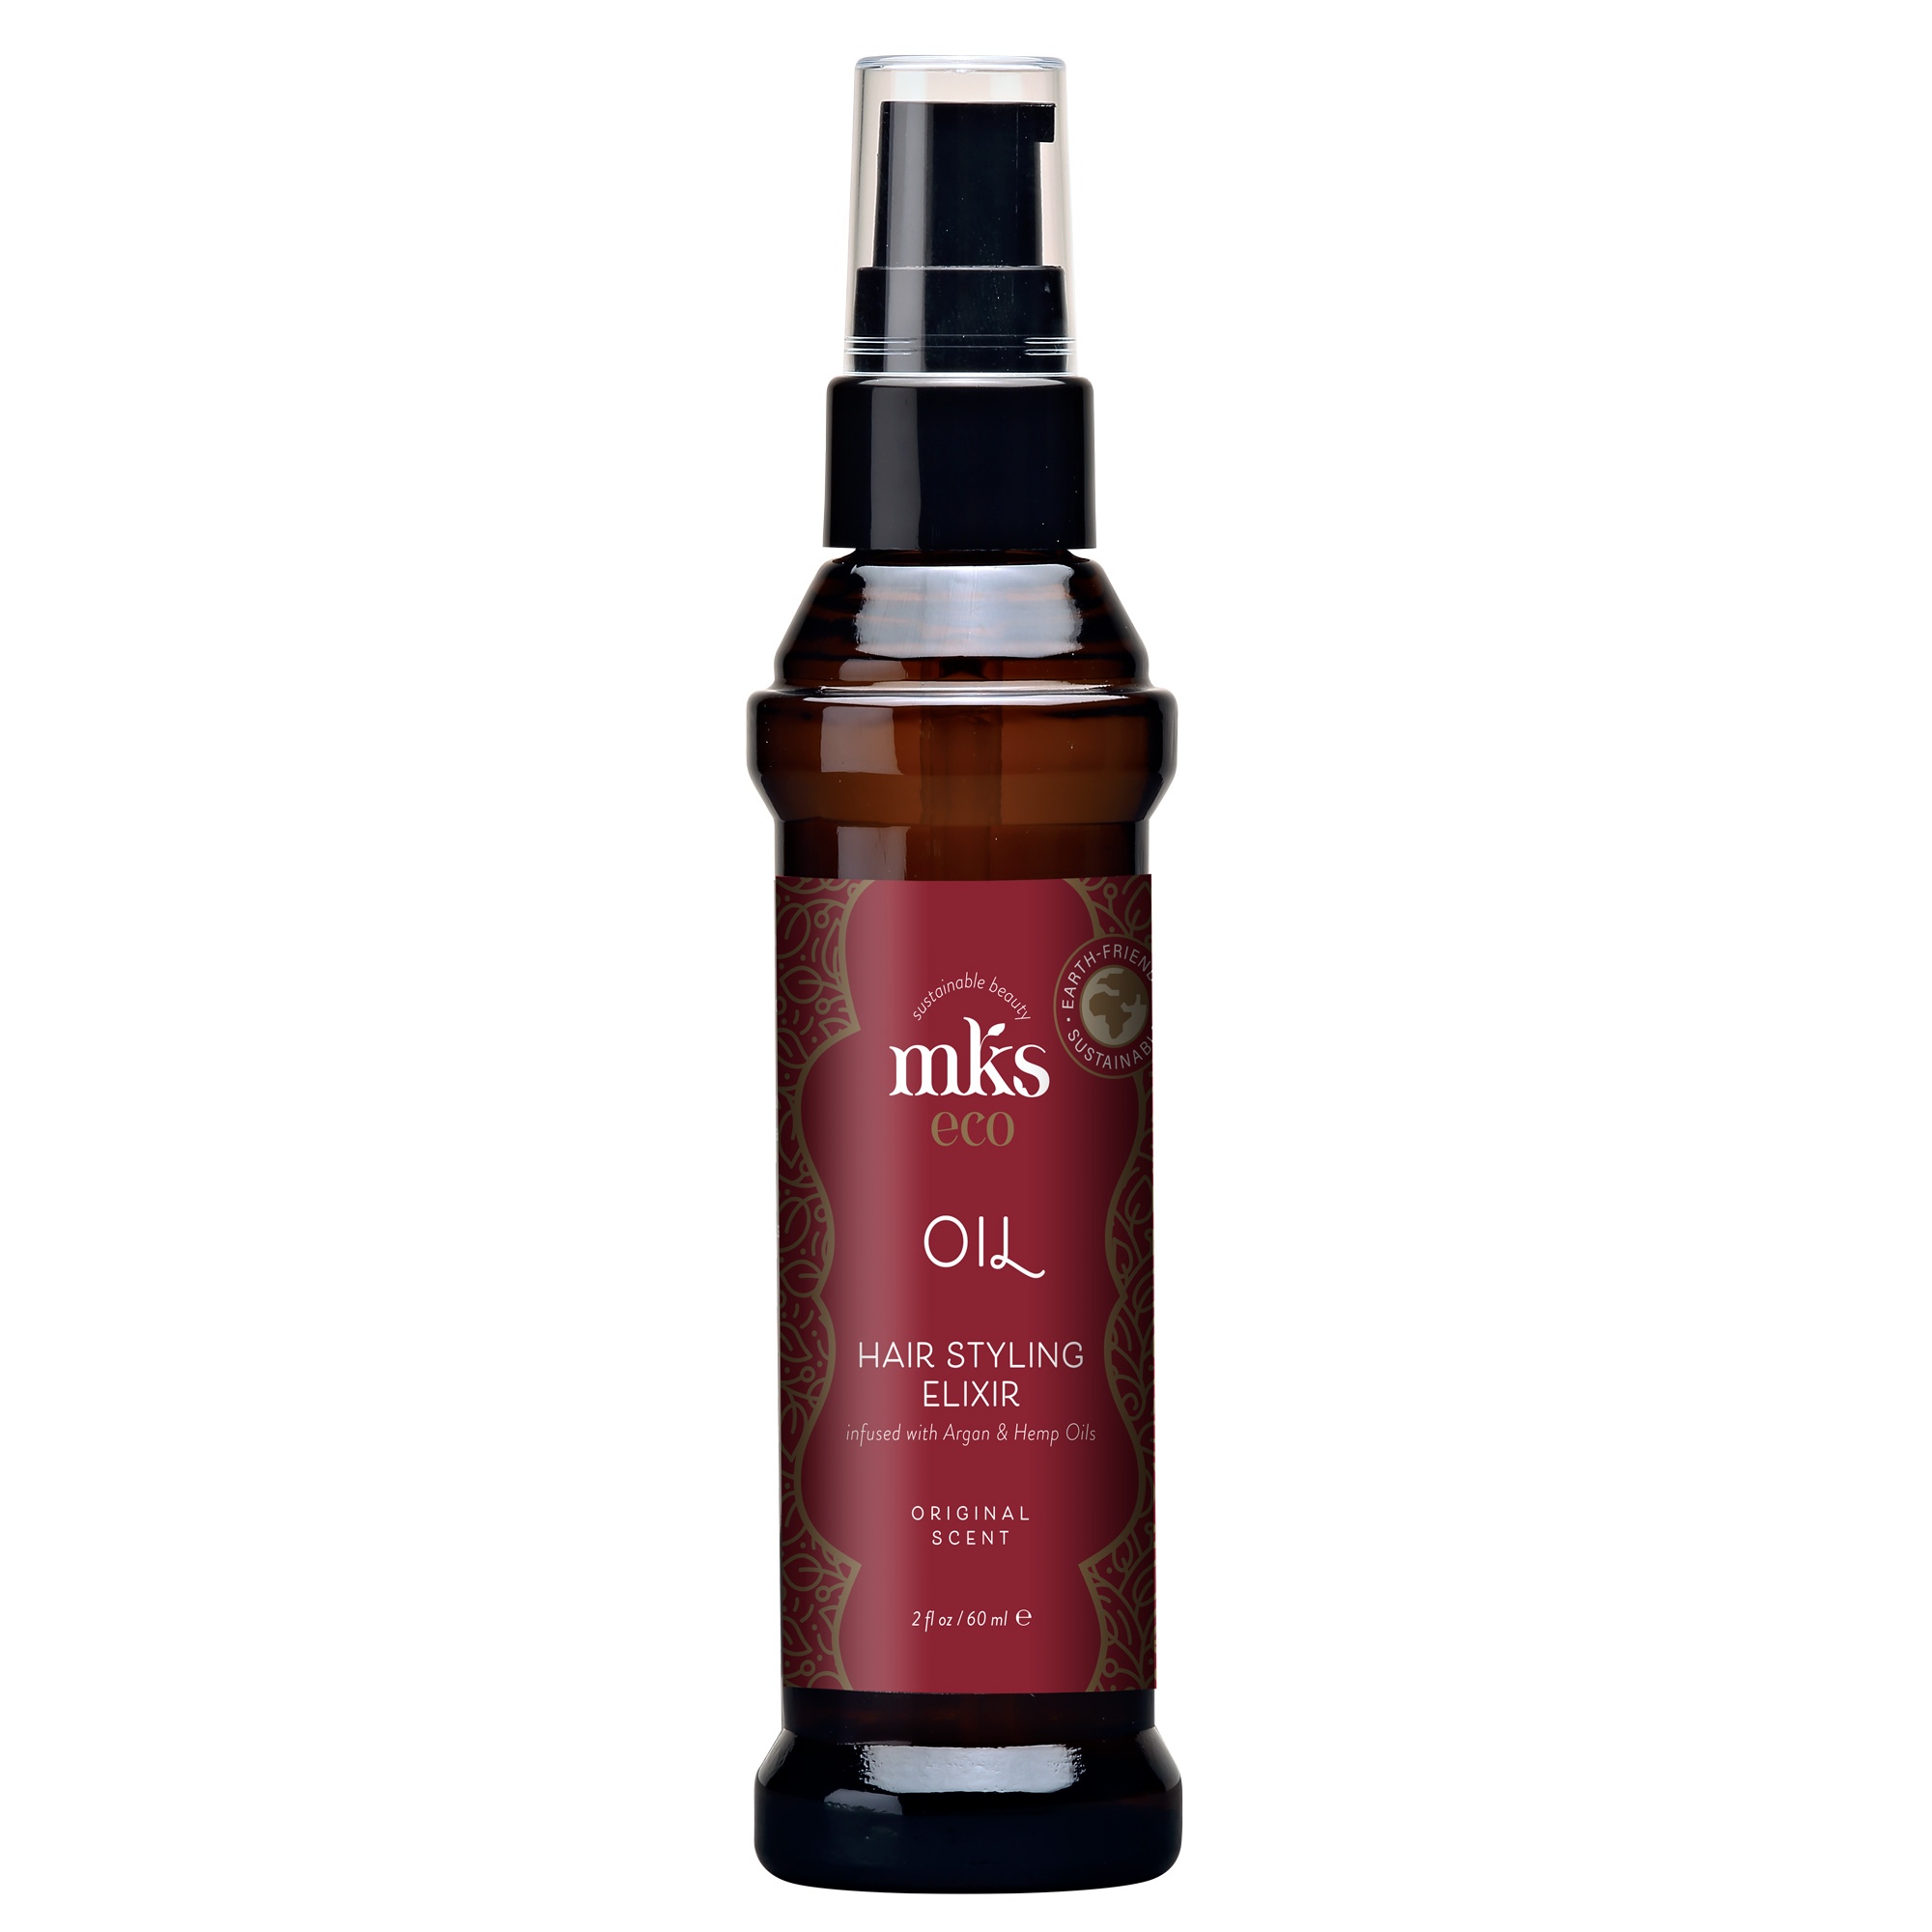 MKS eco Styling: Oil Styling Elixir - Original Scent 2oz